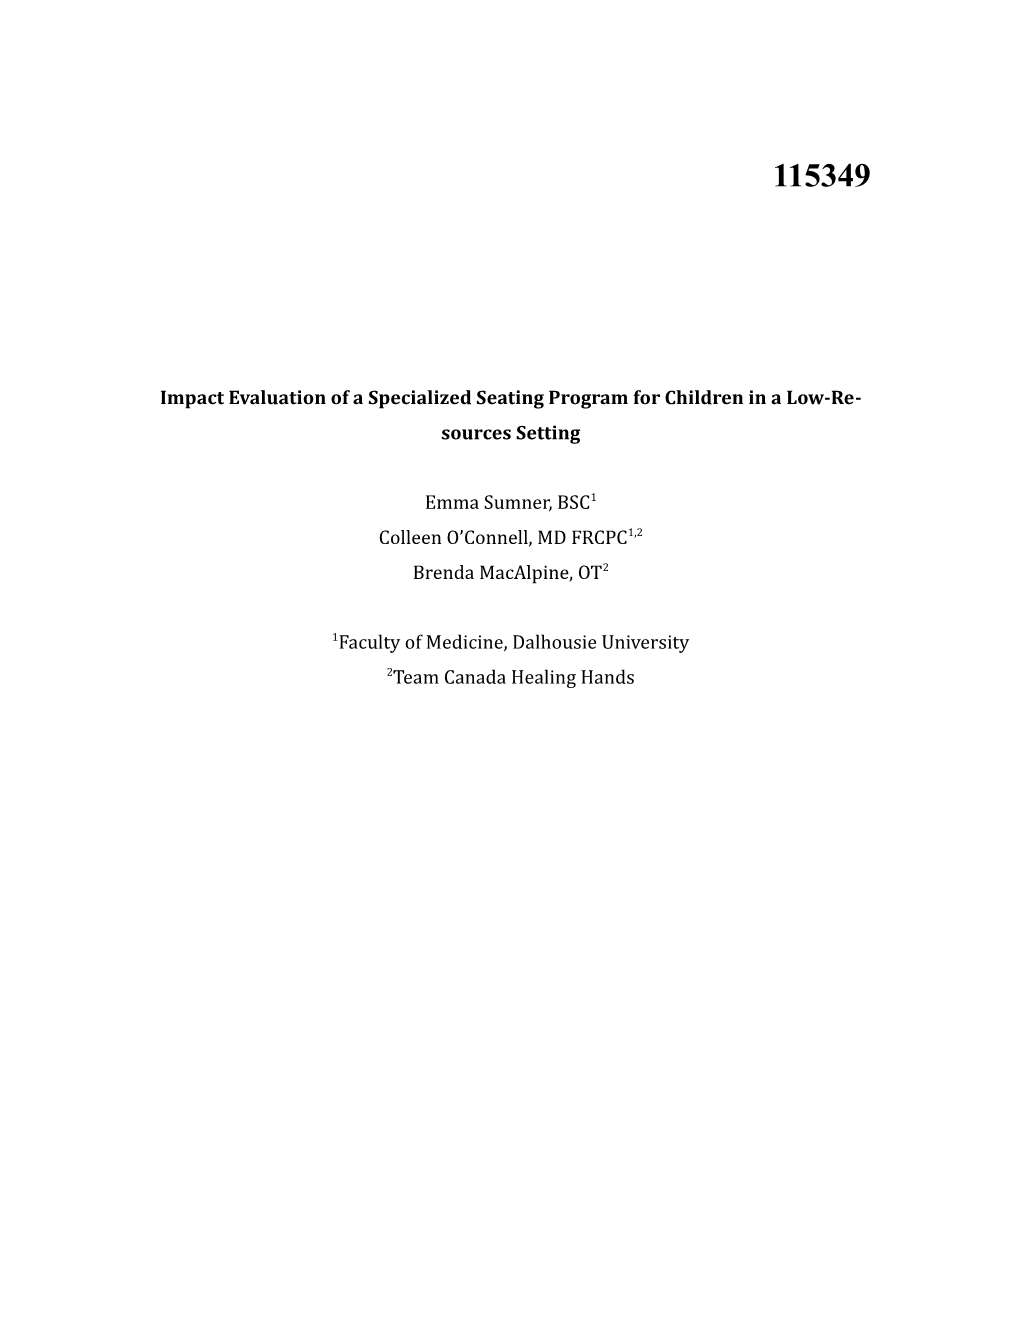 Impact Evaluation of a Specialized Seating Program for Children in a Low-Resources Setting